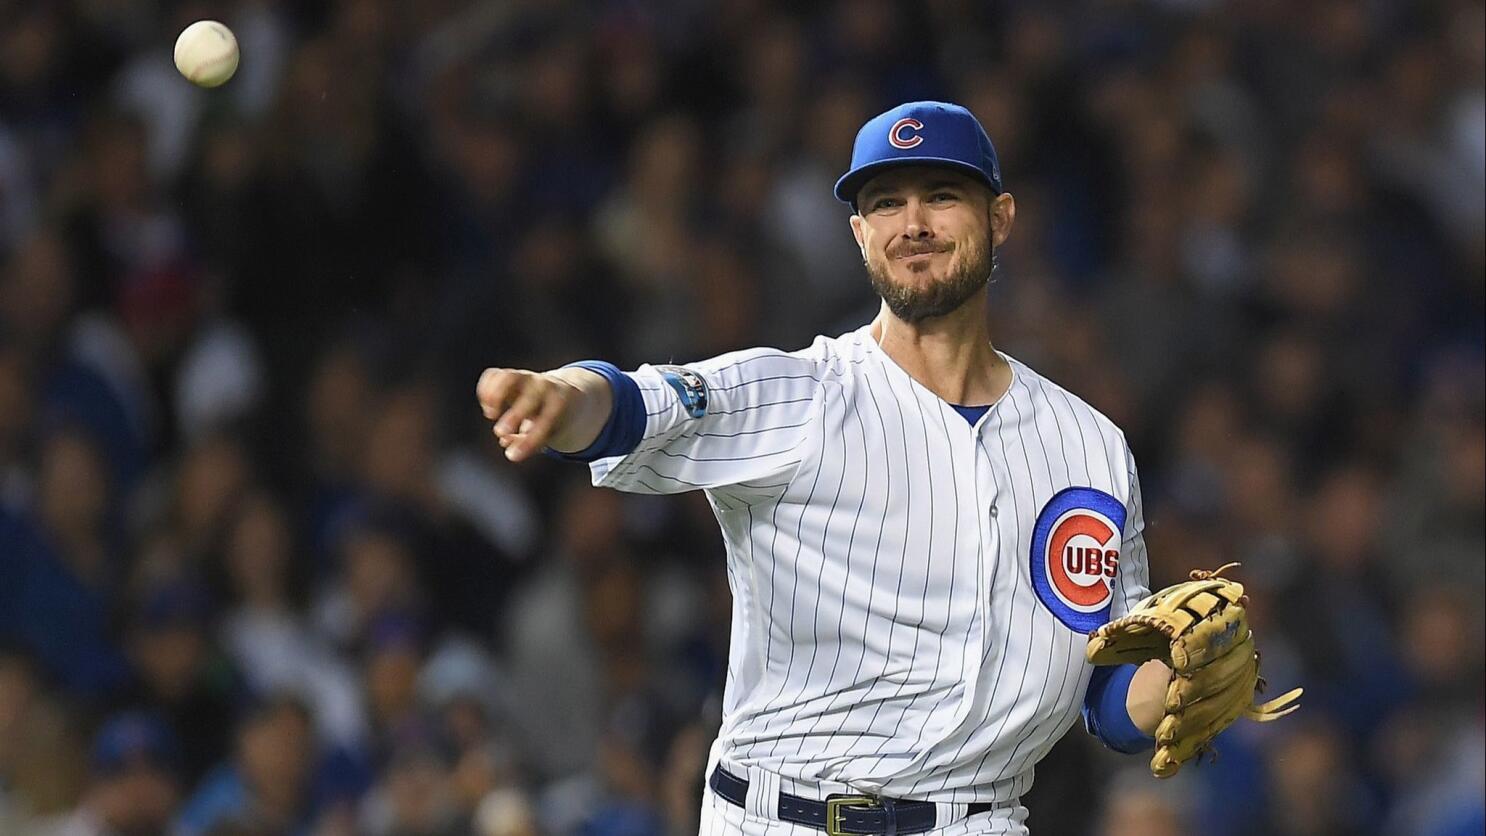 Report: Cubs open to trading USD's Kris Bryant - The San Diego